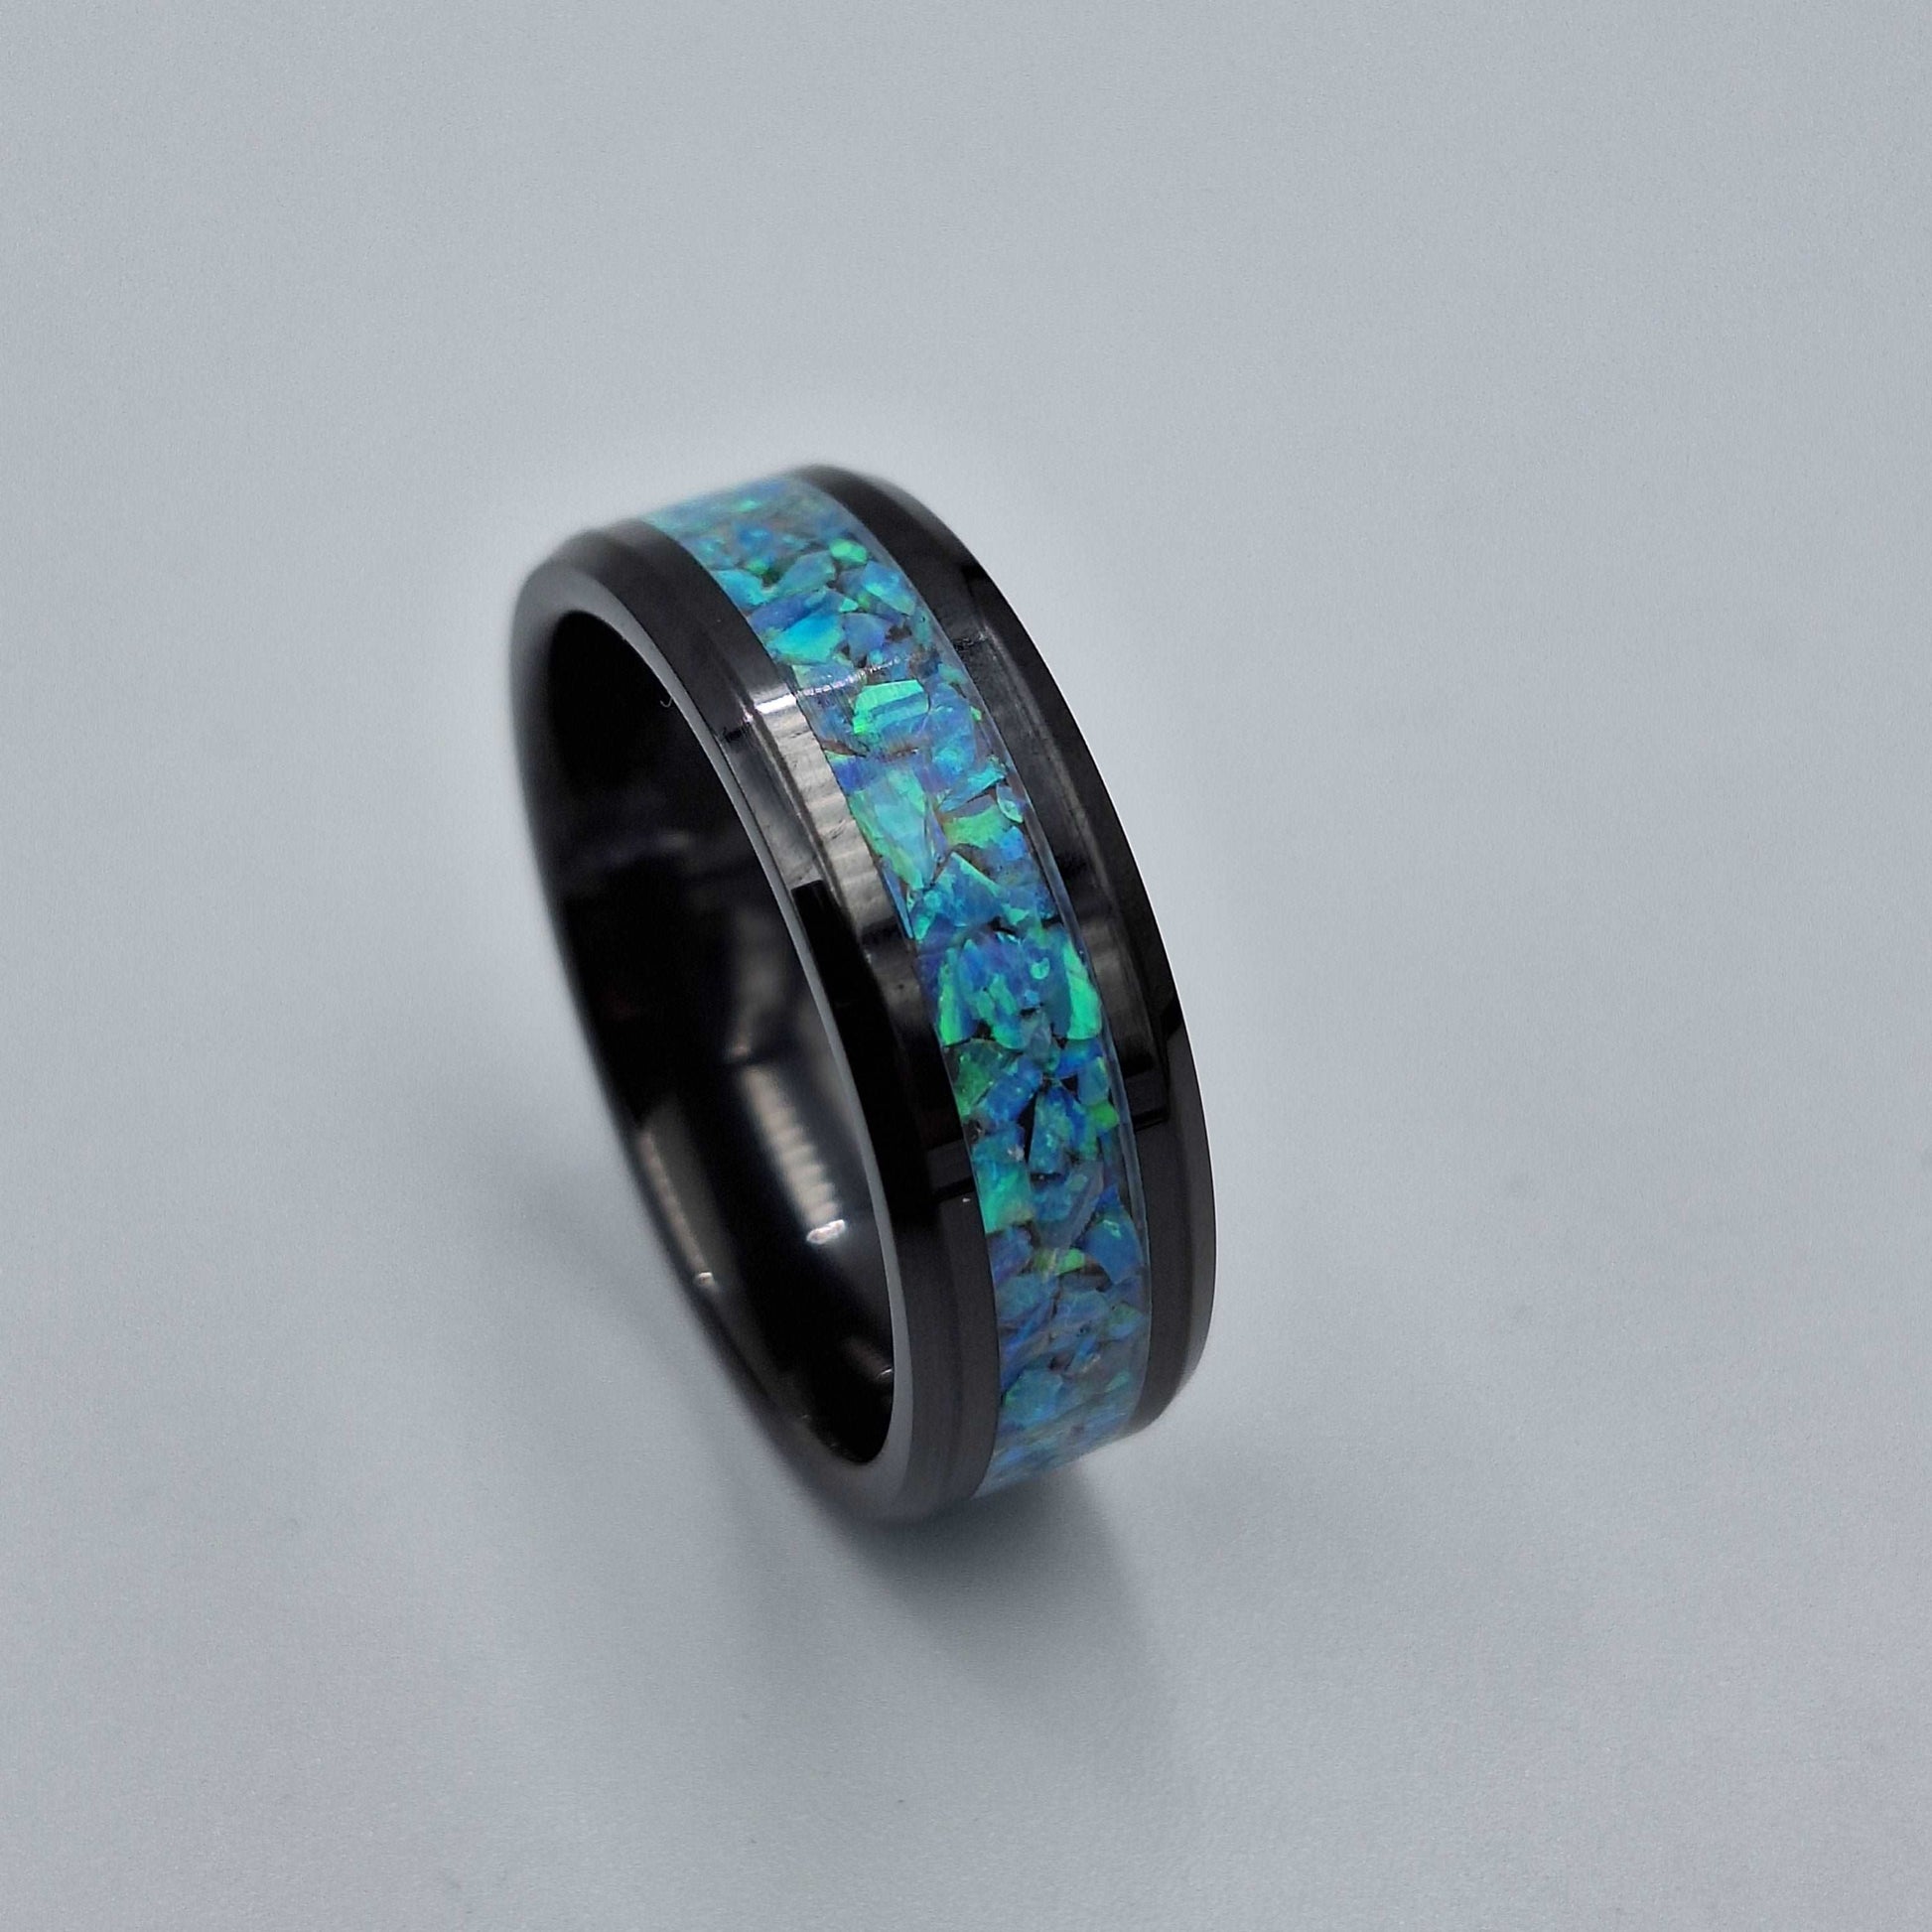 Black Ceramic 8mm Ring With Crushed Opals - Size 12